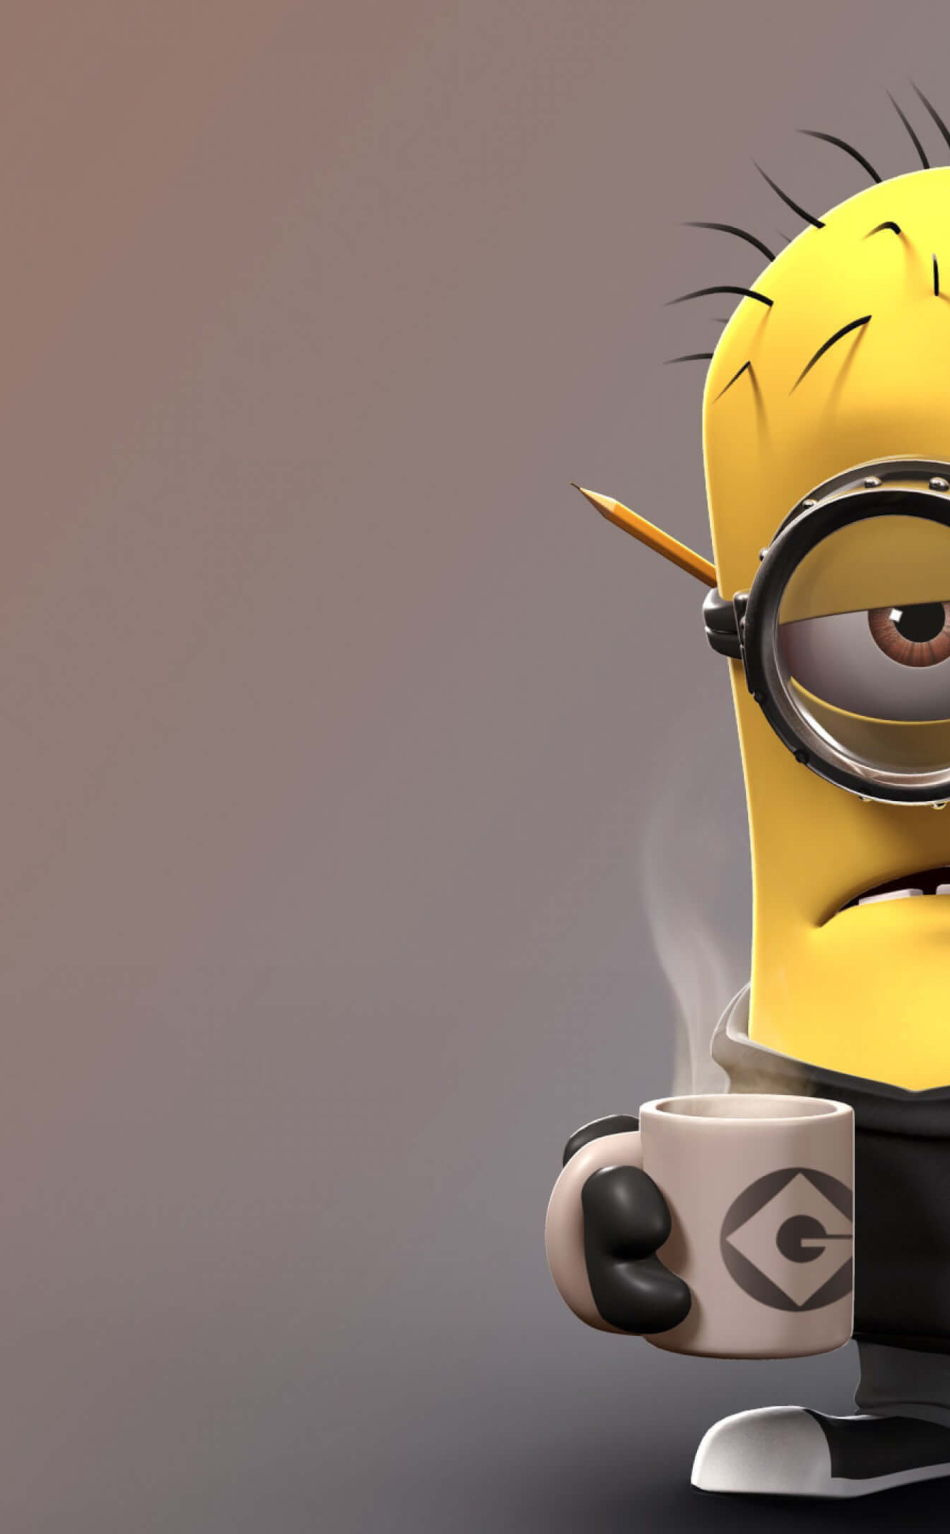 Despicable Me Angry Minion, HD 4K Wallpaper